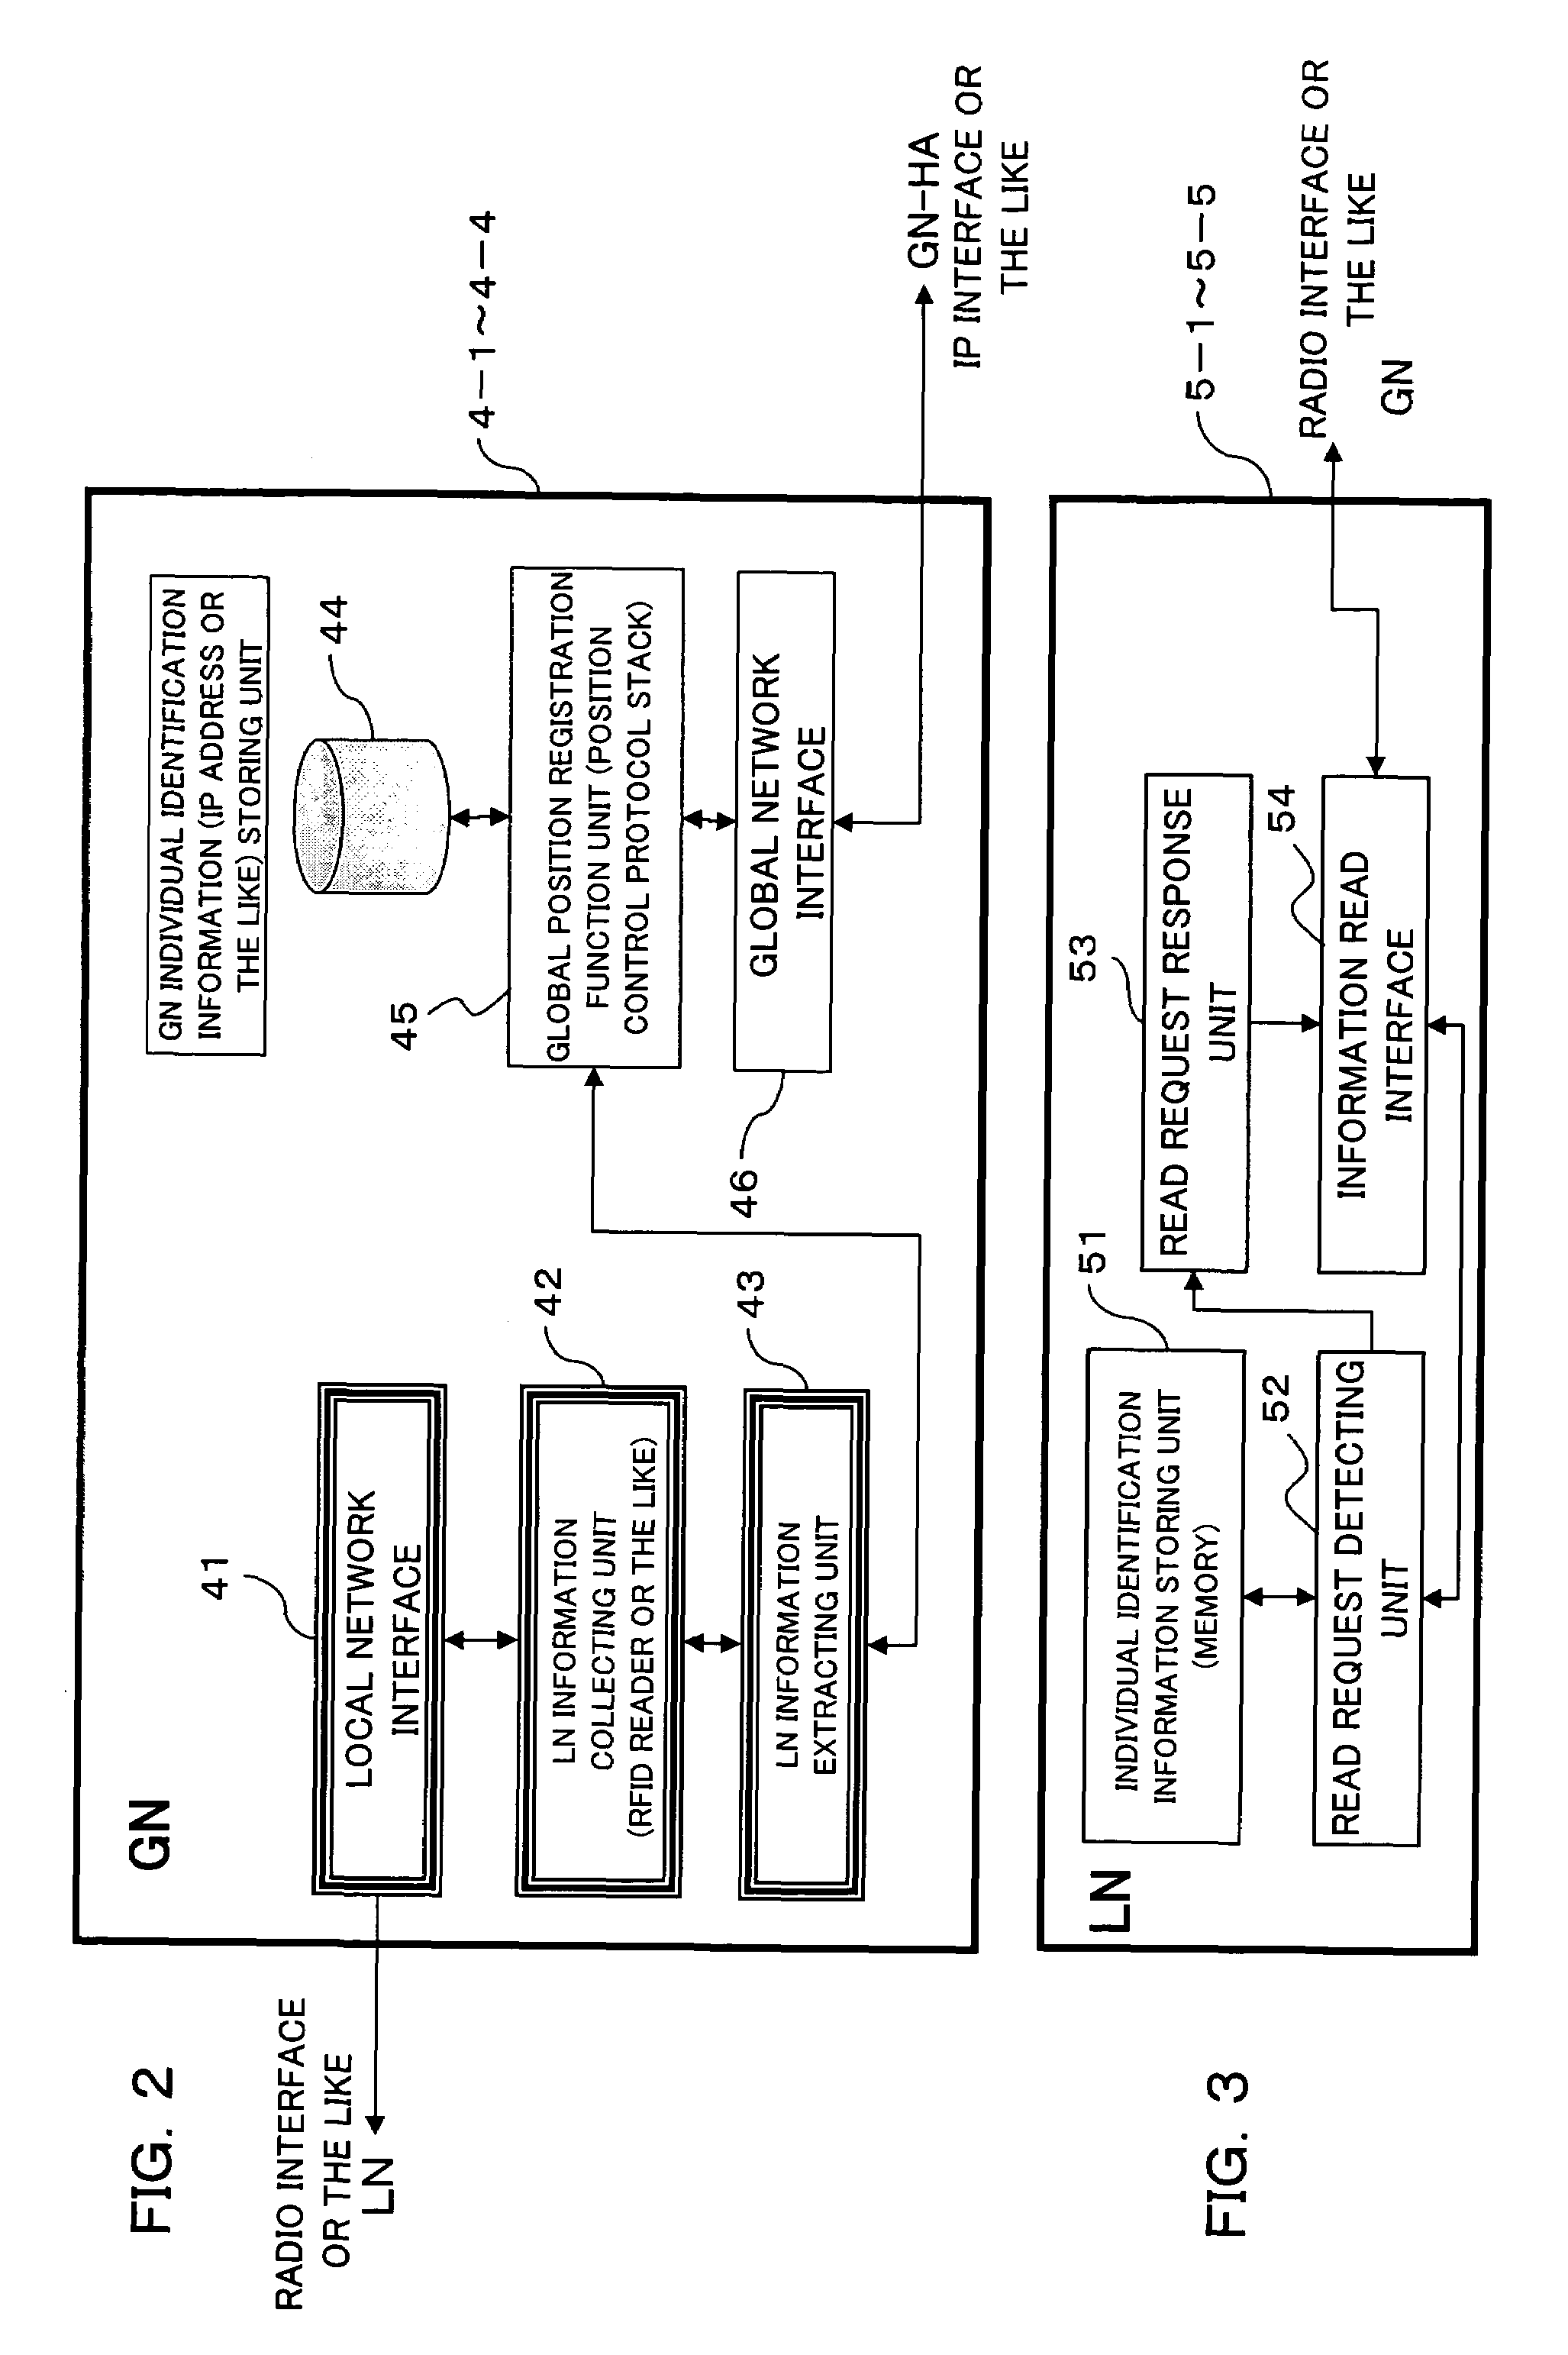 Cooperation information managing apparatus and gateway apparatus for use in cooperation information managing system